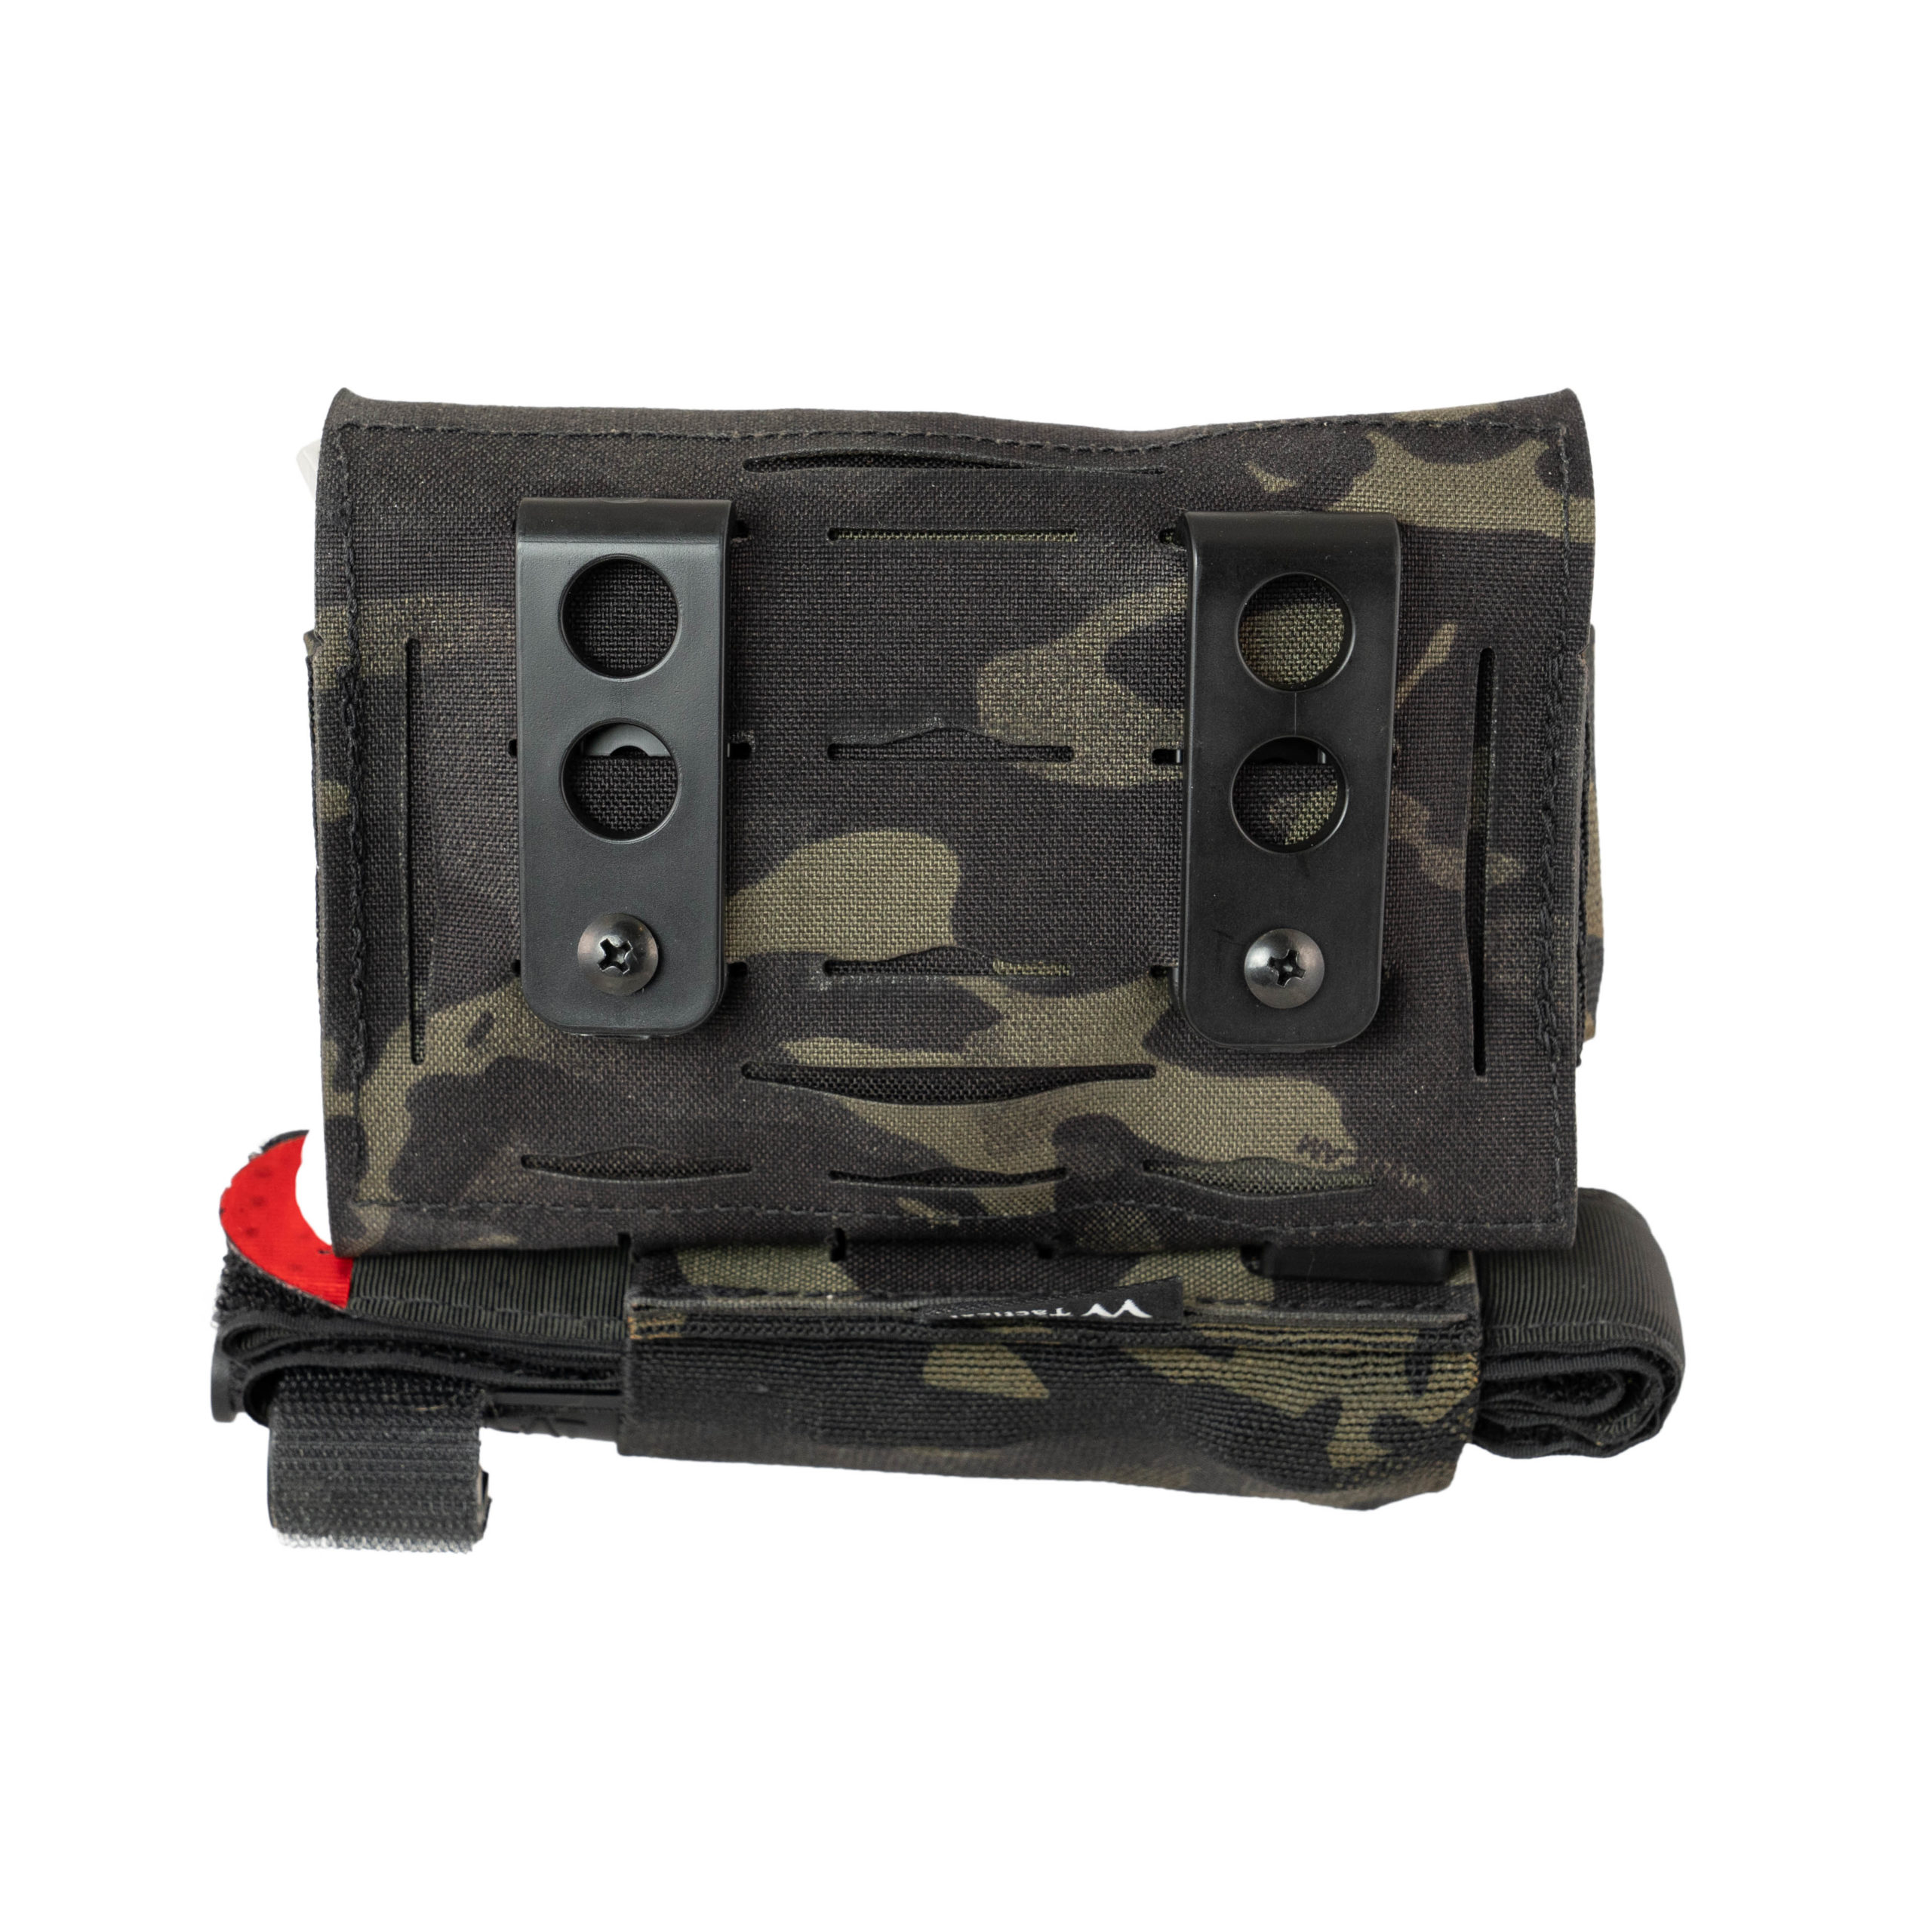 IFAK Medical Pouch Rugged Suppressors